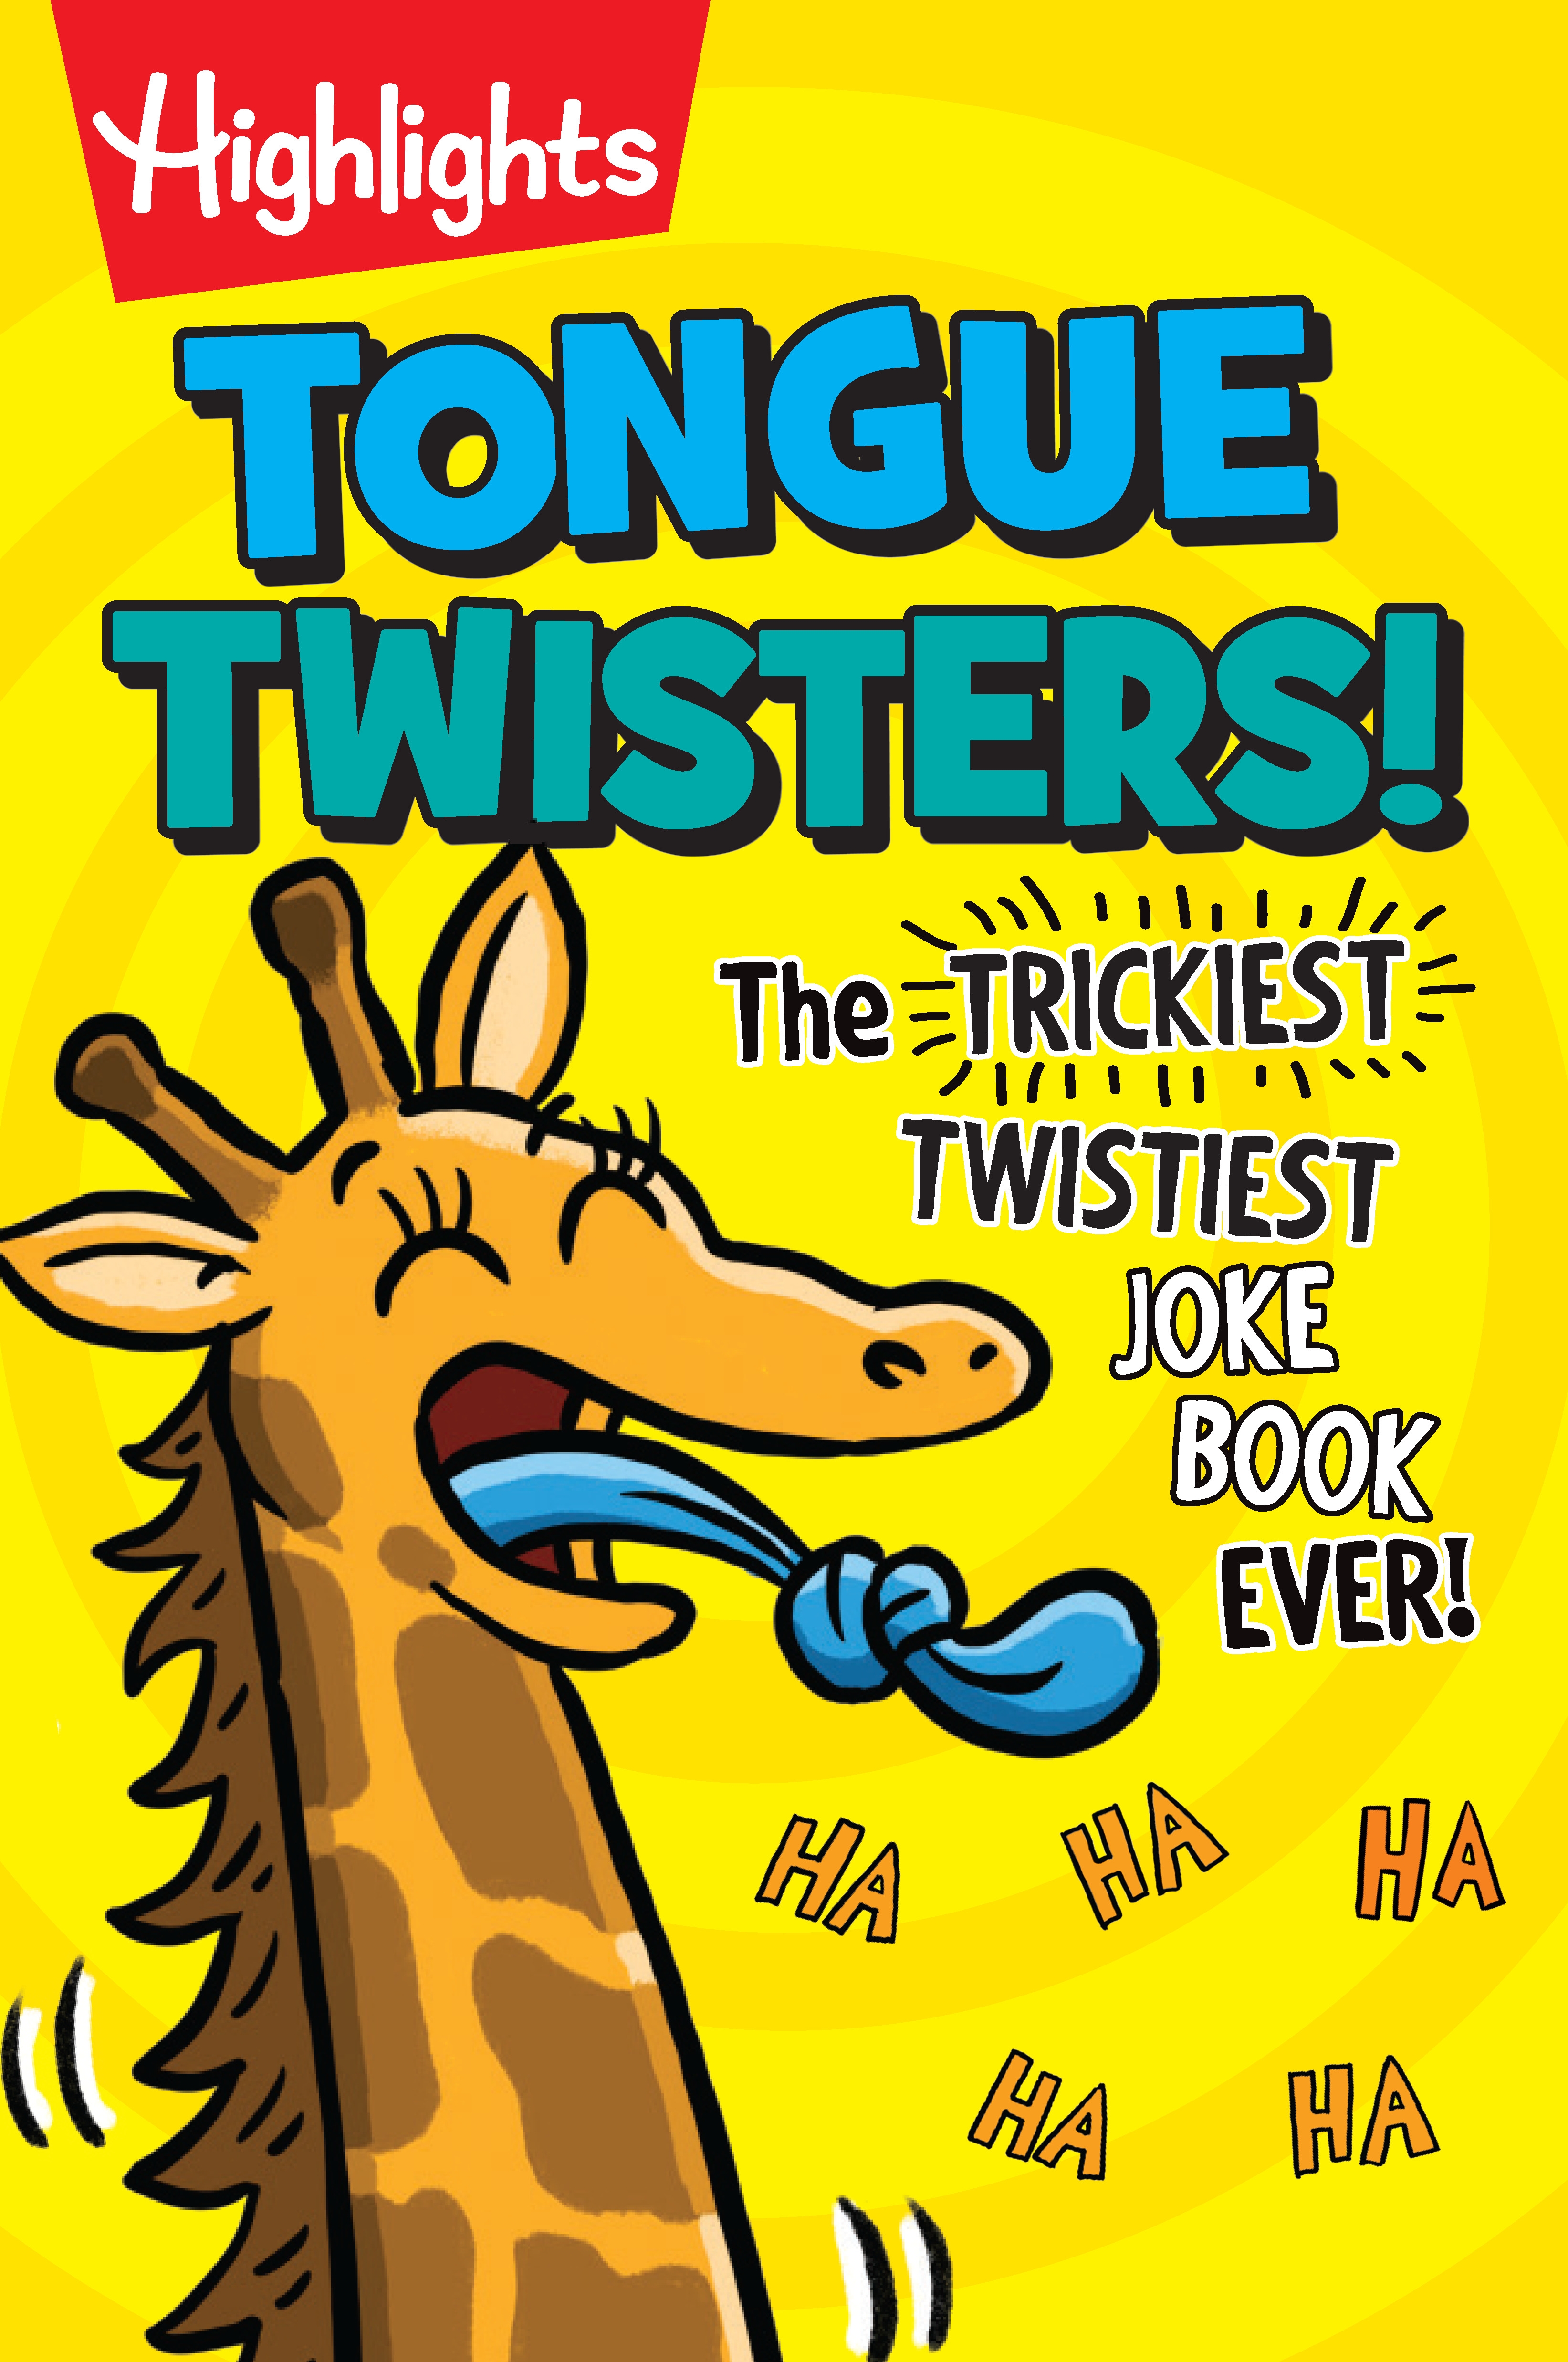 Tongue Twisters! by HIGHLIGHTS Penguin Books Australia